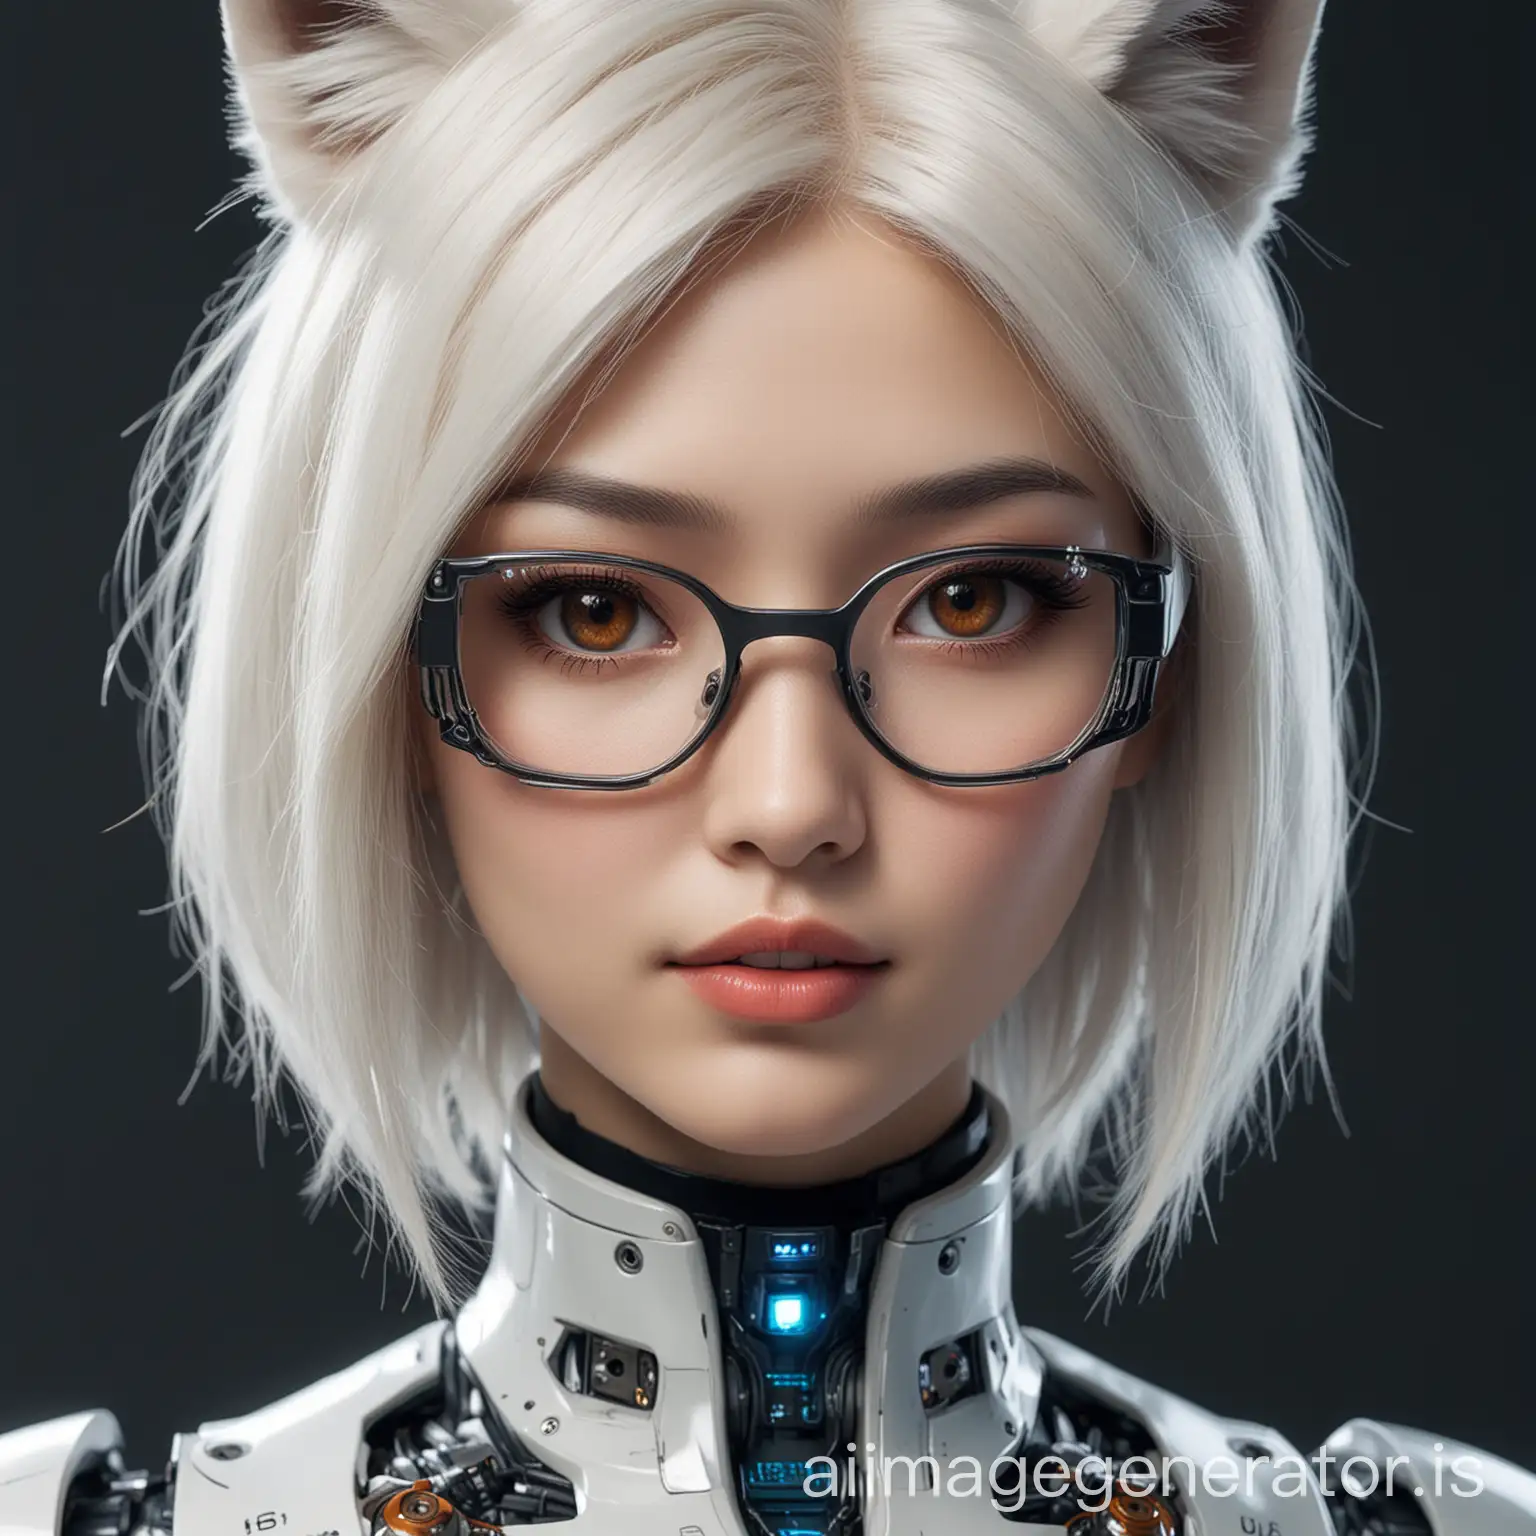 Asian Robot girl, online assistant, white hair. glasses. personifying artificial intelligence in the form of a logo. I want to put it as the logo of the online assistant in the system. with feminine features, sexy, 18-20 years old and as futuristic as possible. with human elements such as hair, etc. without a headset or headphones. foreground. background is transparent. Without a background, the face should be looking straight at me. Brunette. Big breasts. “Foxes” i.e. cunning, but human eyes and long eyelashes. Plump lips. At the bottom text “ASSISTANT” in a futuristic font. 